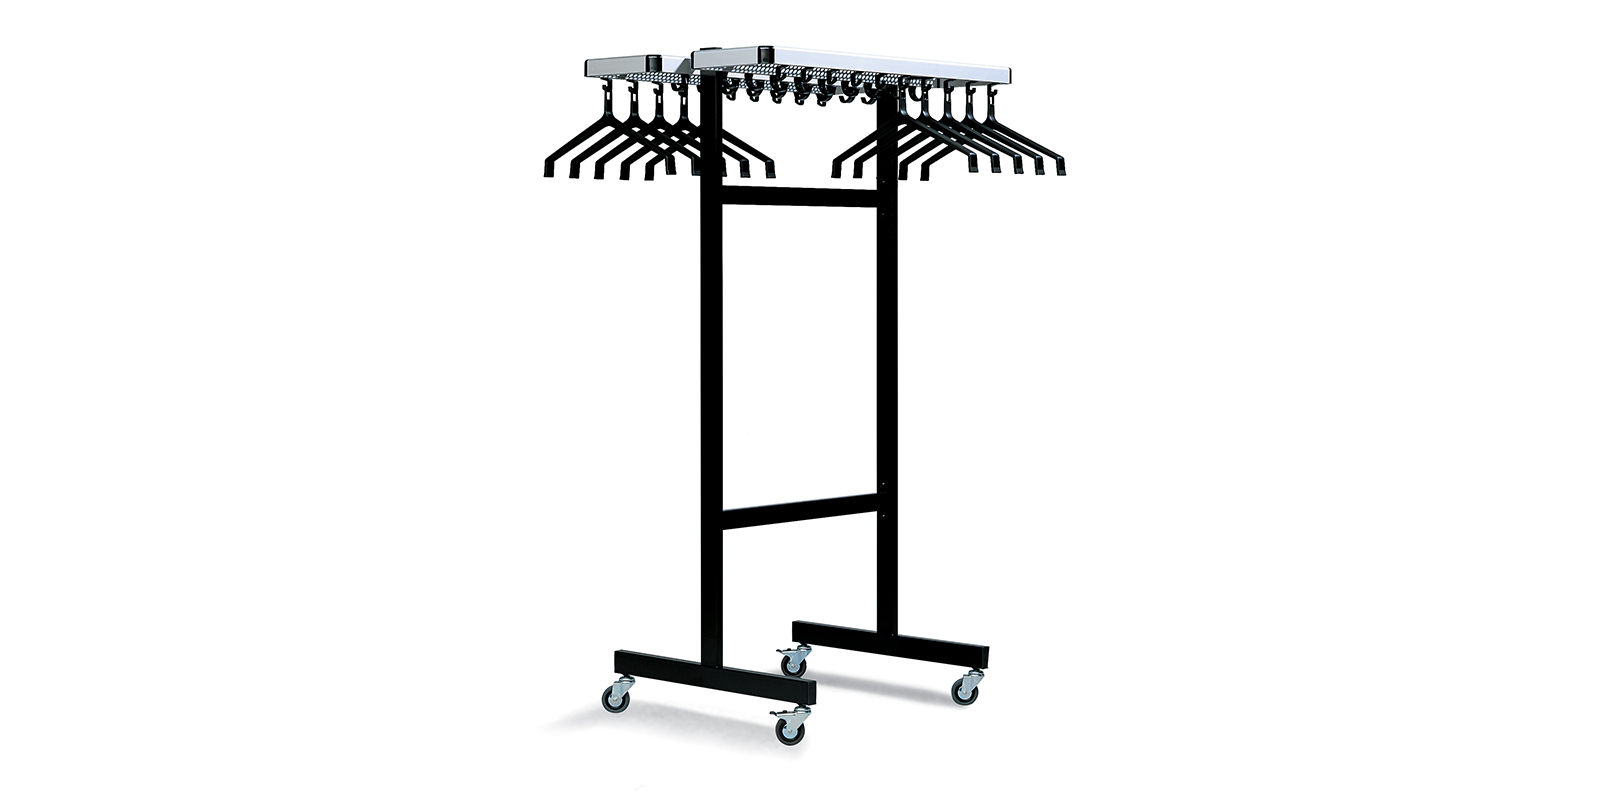 Double-sided mobile coat rack with hat rack and coat hangers - WHKH07